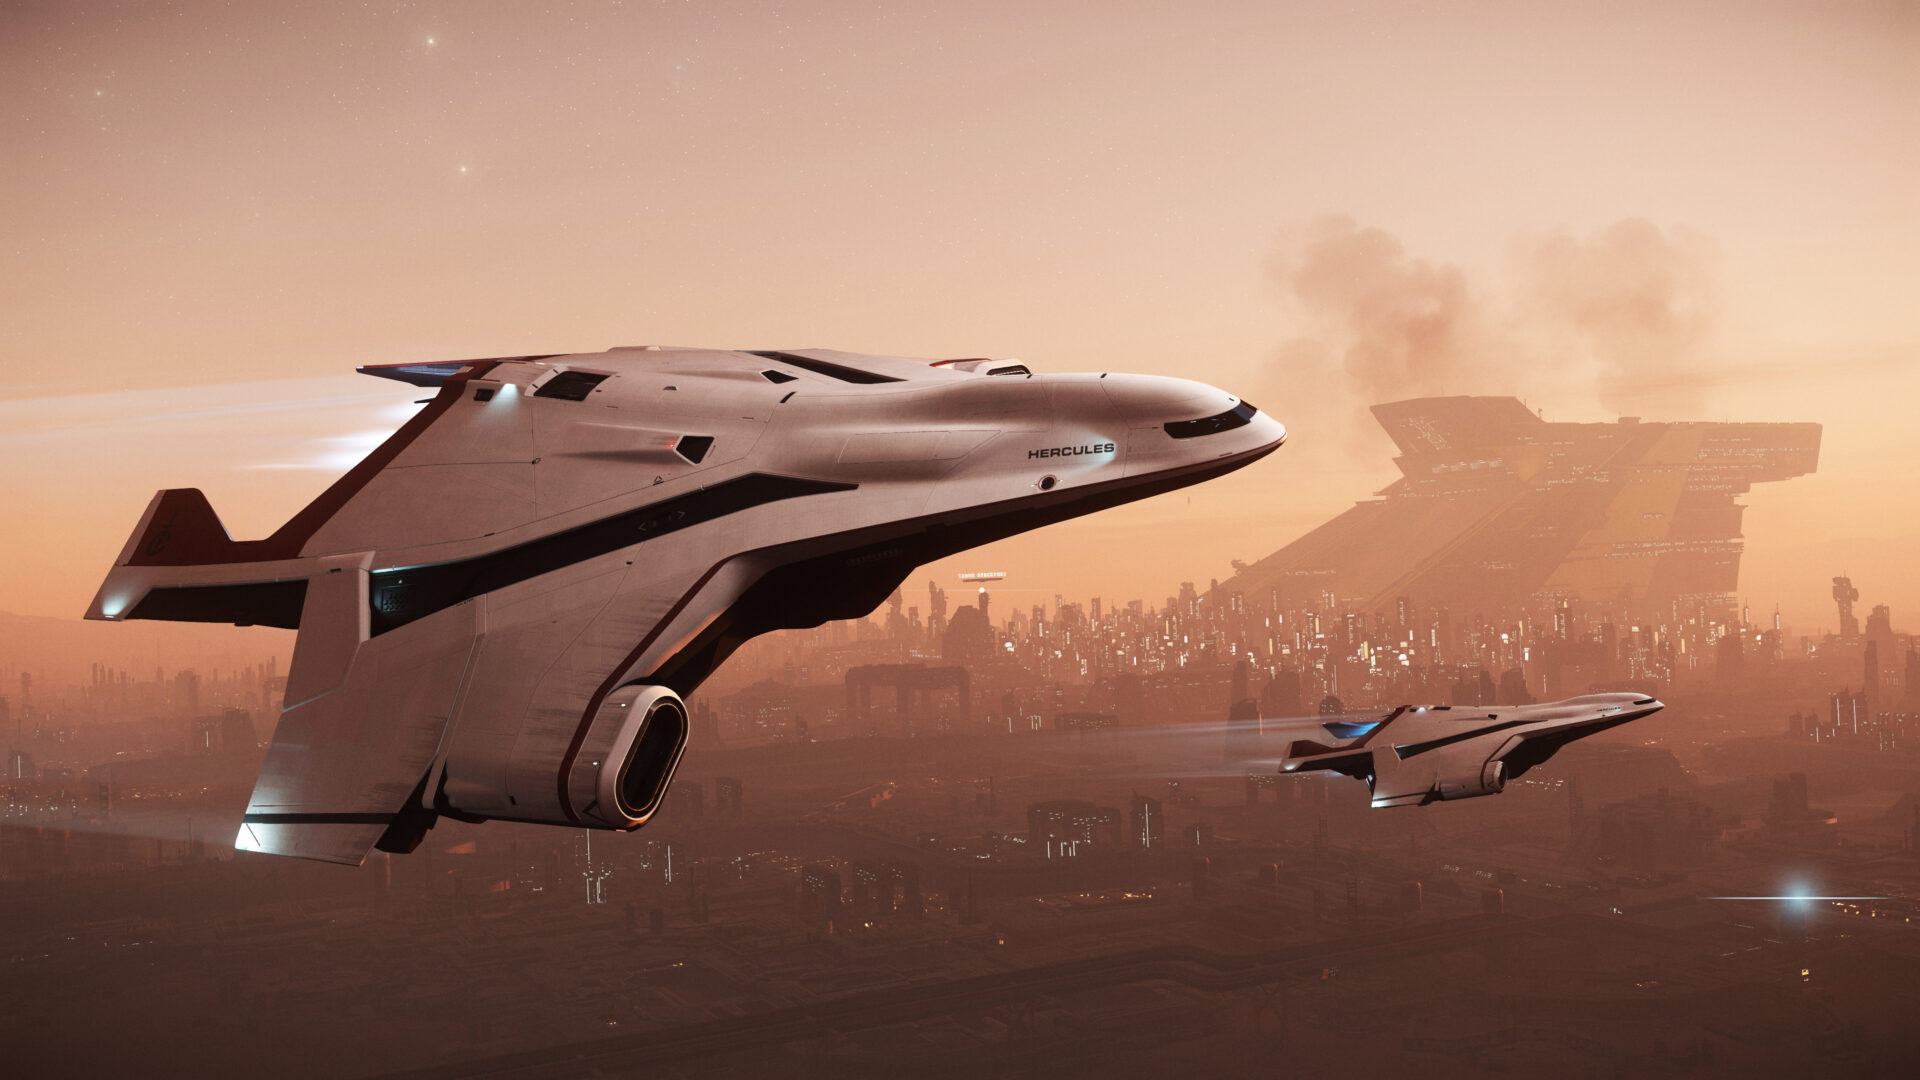 Star Citizen Kicks Off Invictus Launch Week 2951 With Epic Trailer